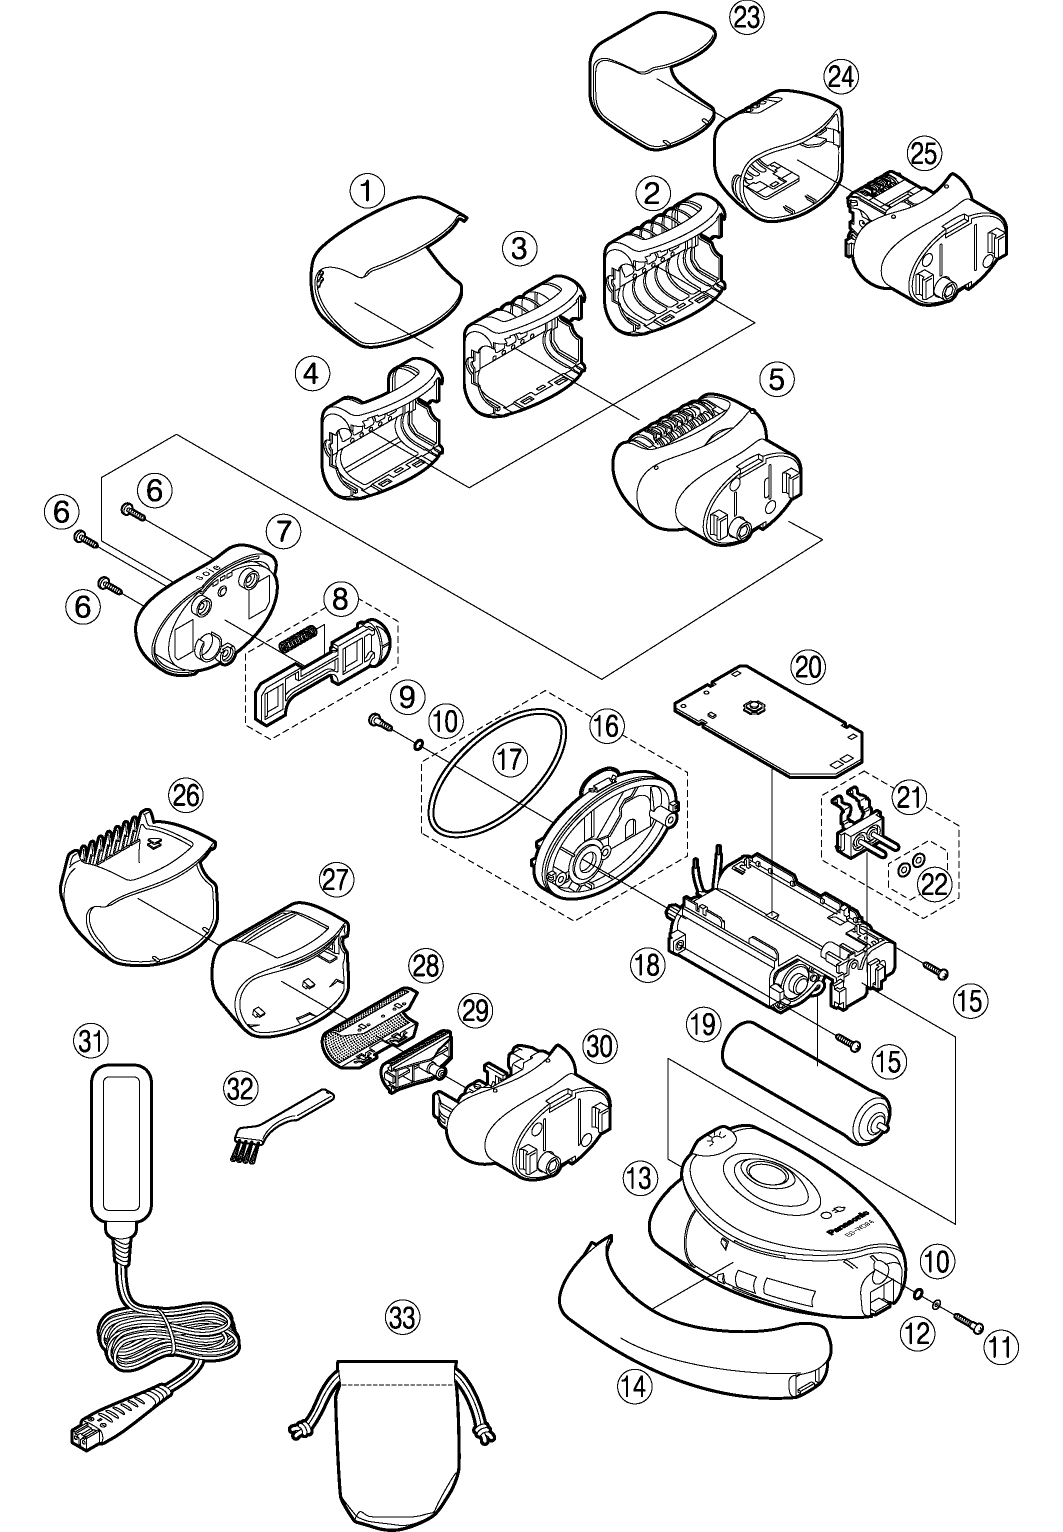 ES-WD74: Exploded View